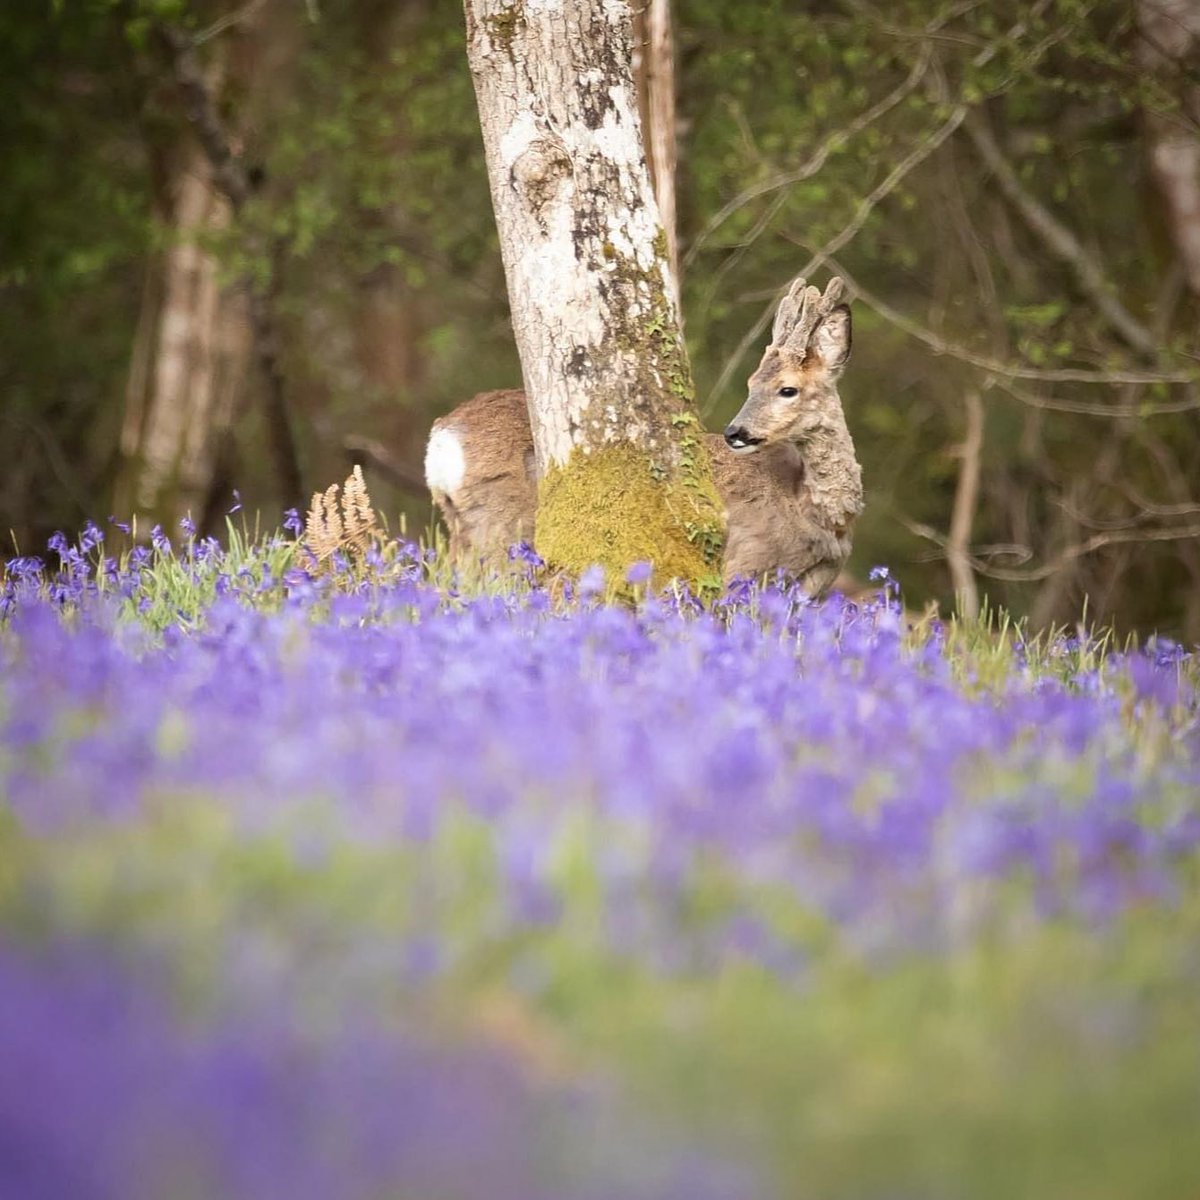 You never know who you'll meet on a wan-deer through the woods this weekend... Find out how to identify deer in the forest 👉 forestryengland.uk/blog/forest-gu… 📷 Laura Jackson 📍 The New Forest 🦌 #MammalWeek